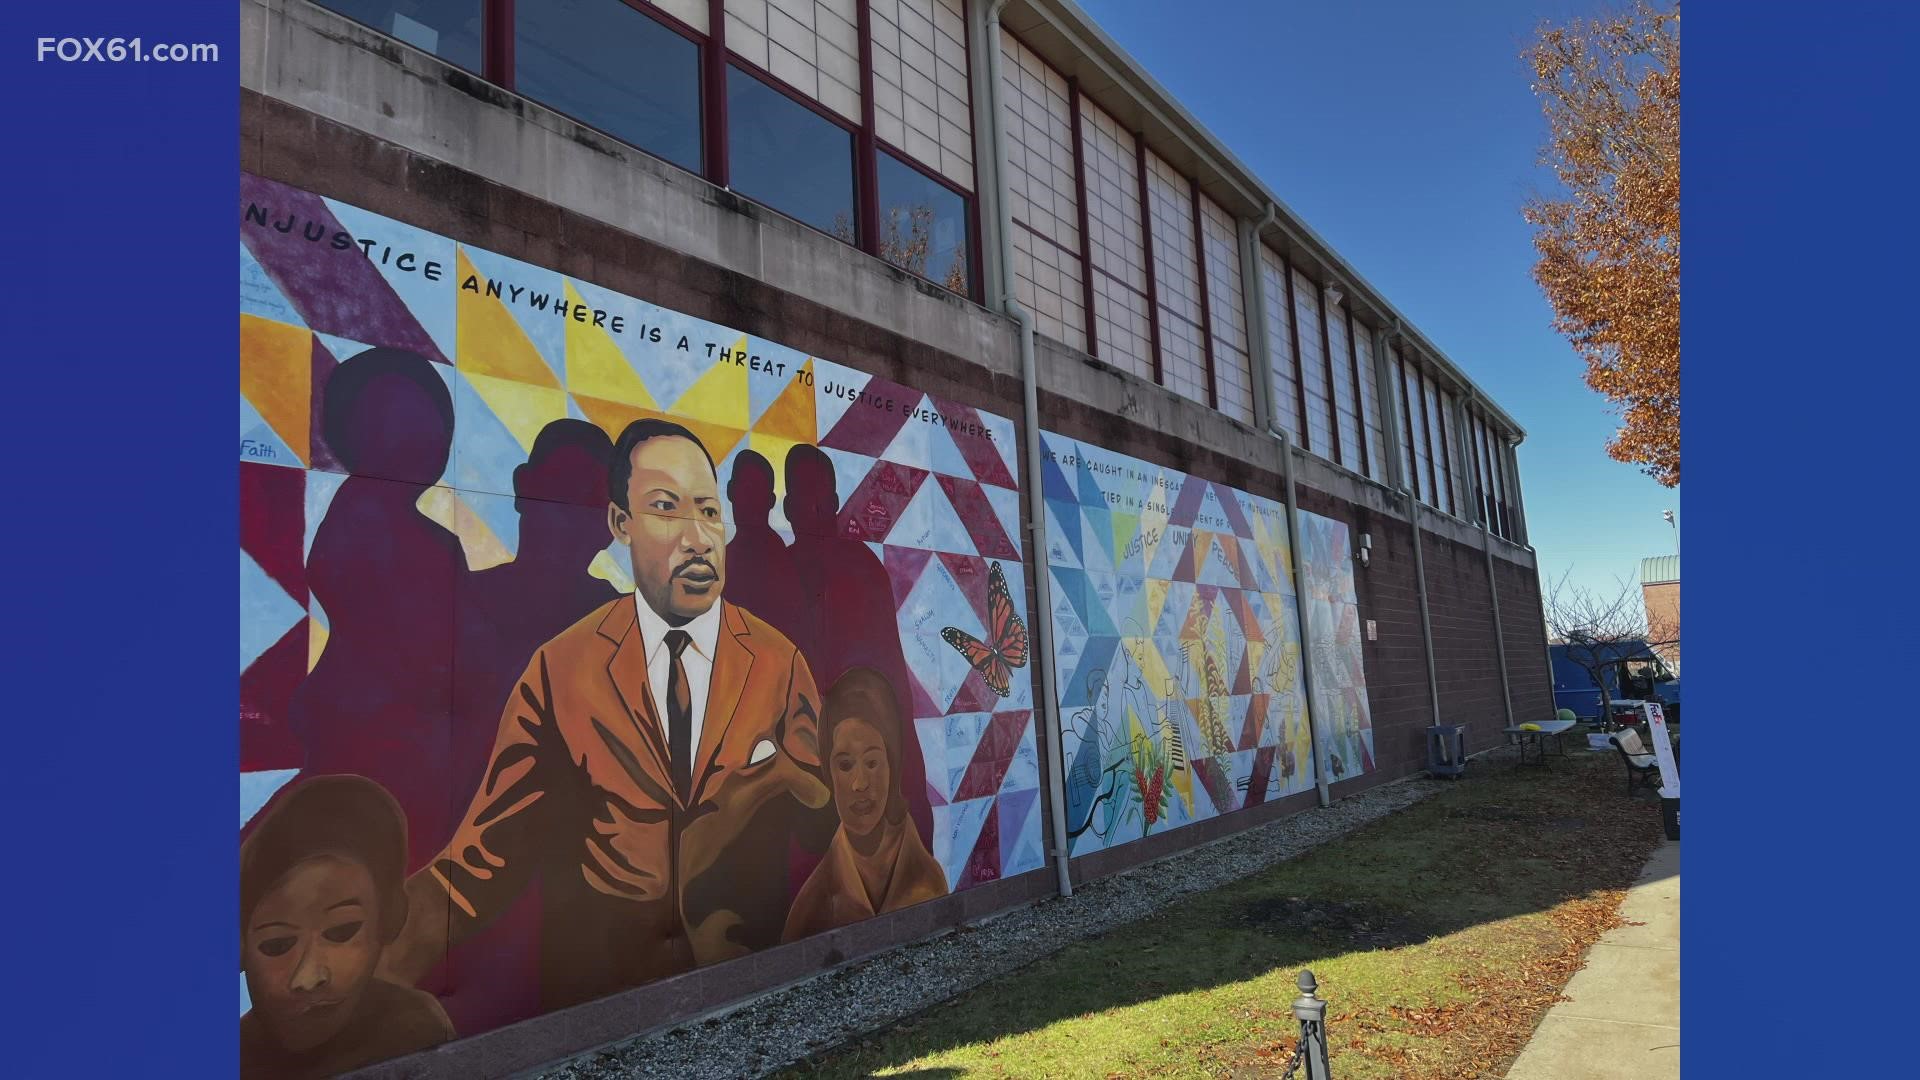 RiseUP is collecting donations to help paint the mural honoring MLK